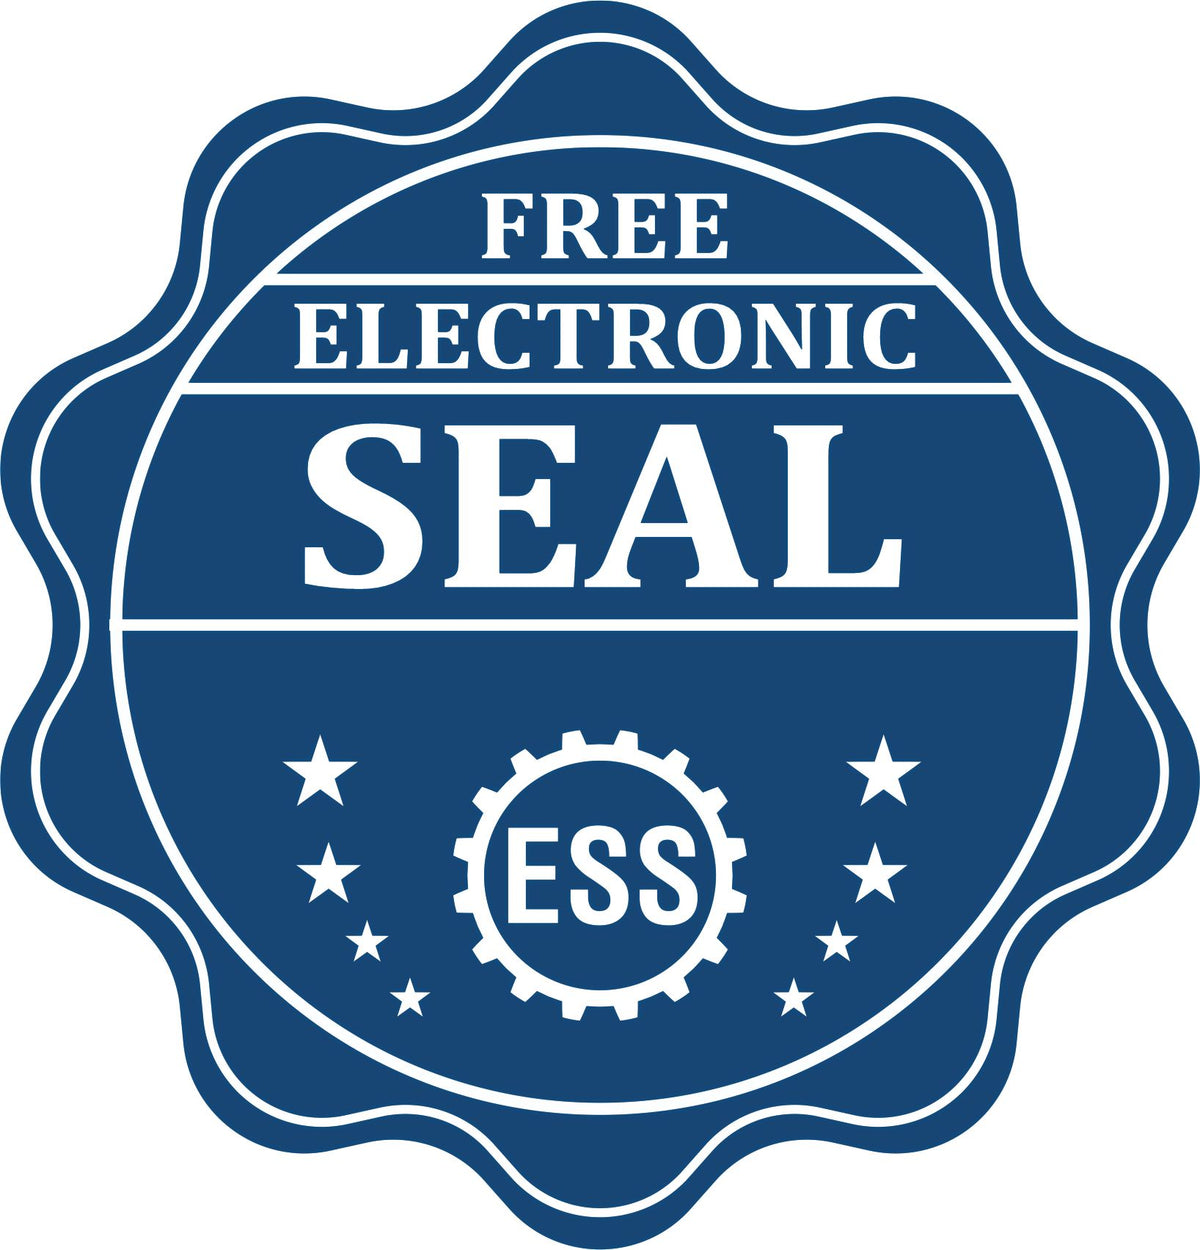 A badge showing a free electronic seal for the Heavy-Duty Montana Rectangular Notary Stamp with stars and the ESS gear on the emblem.